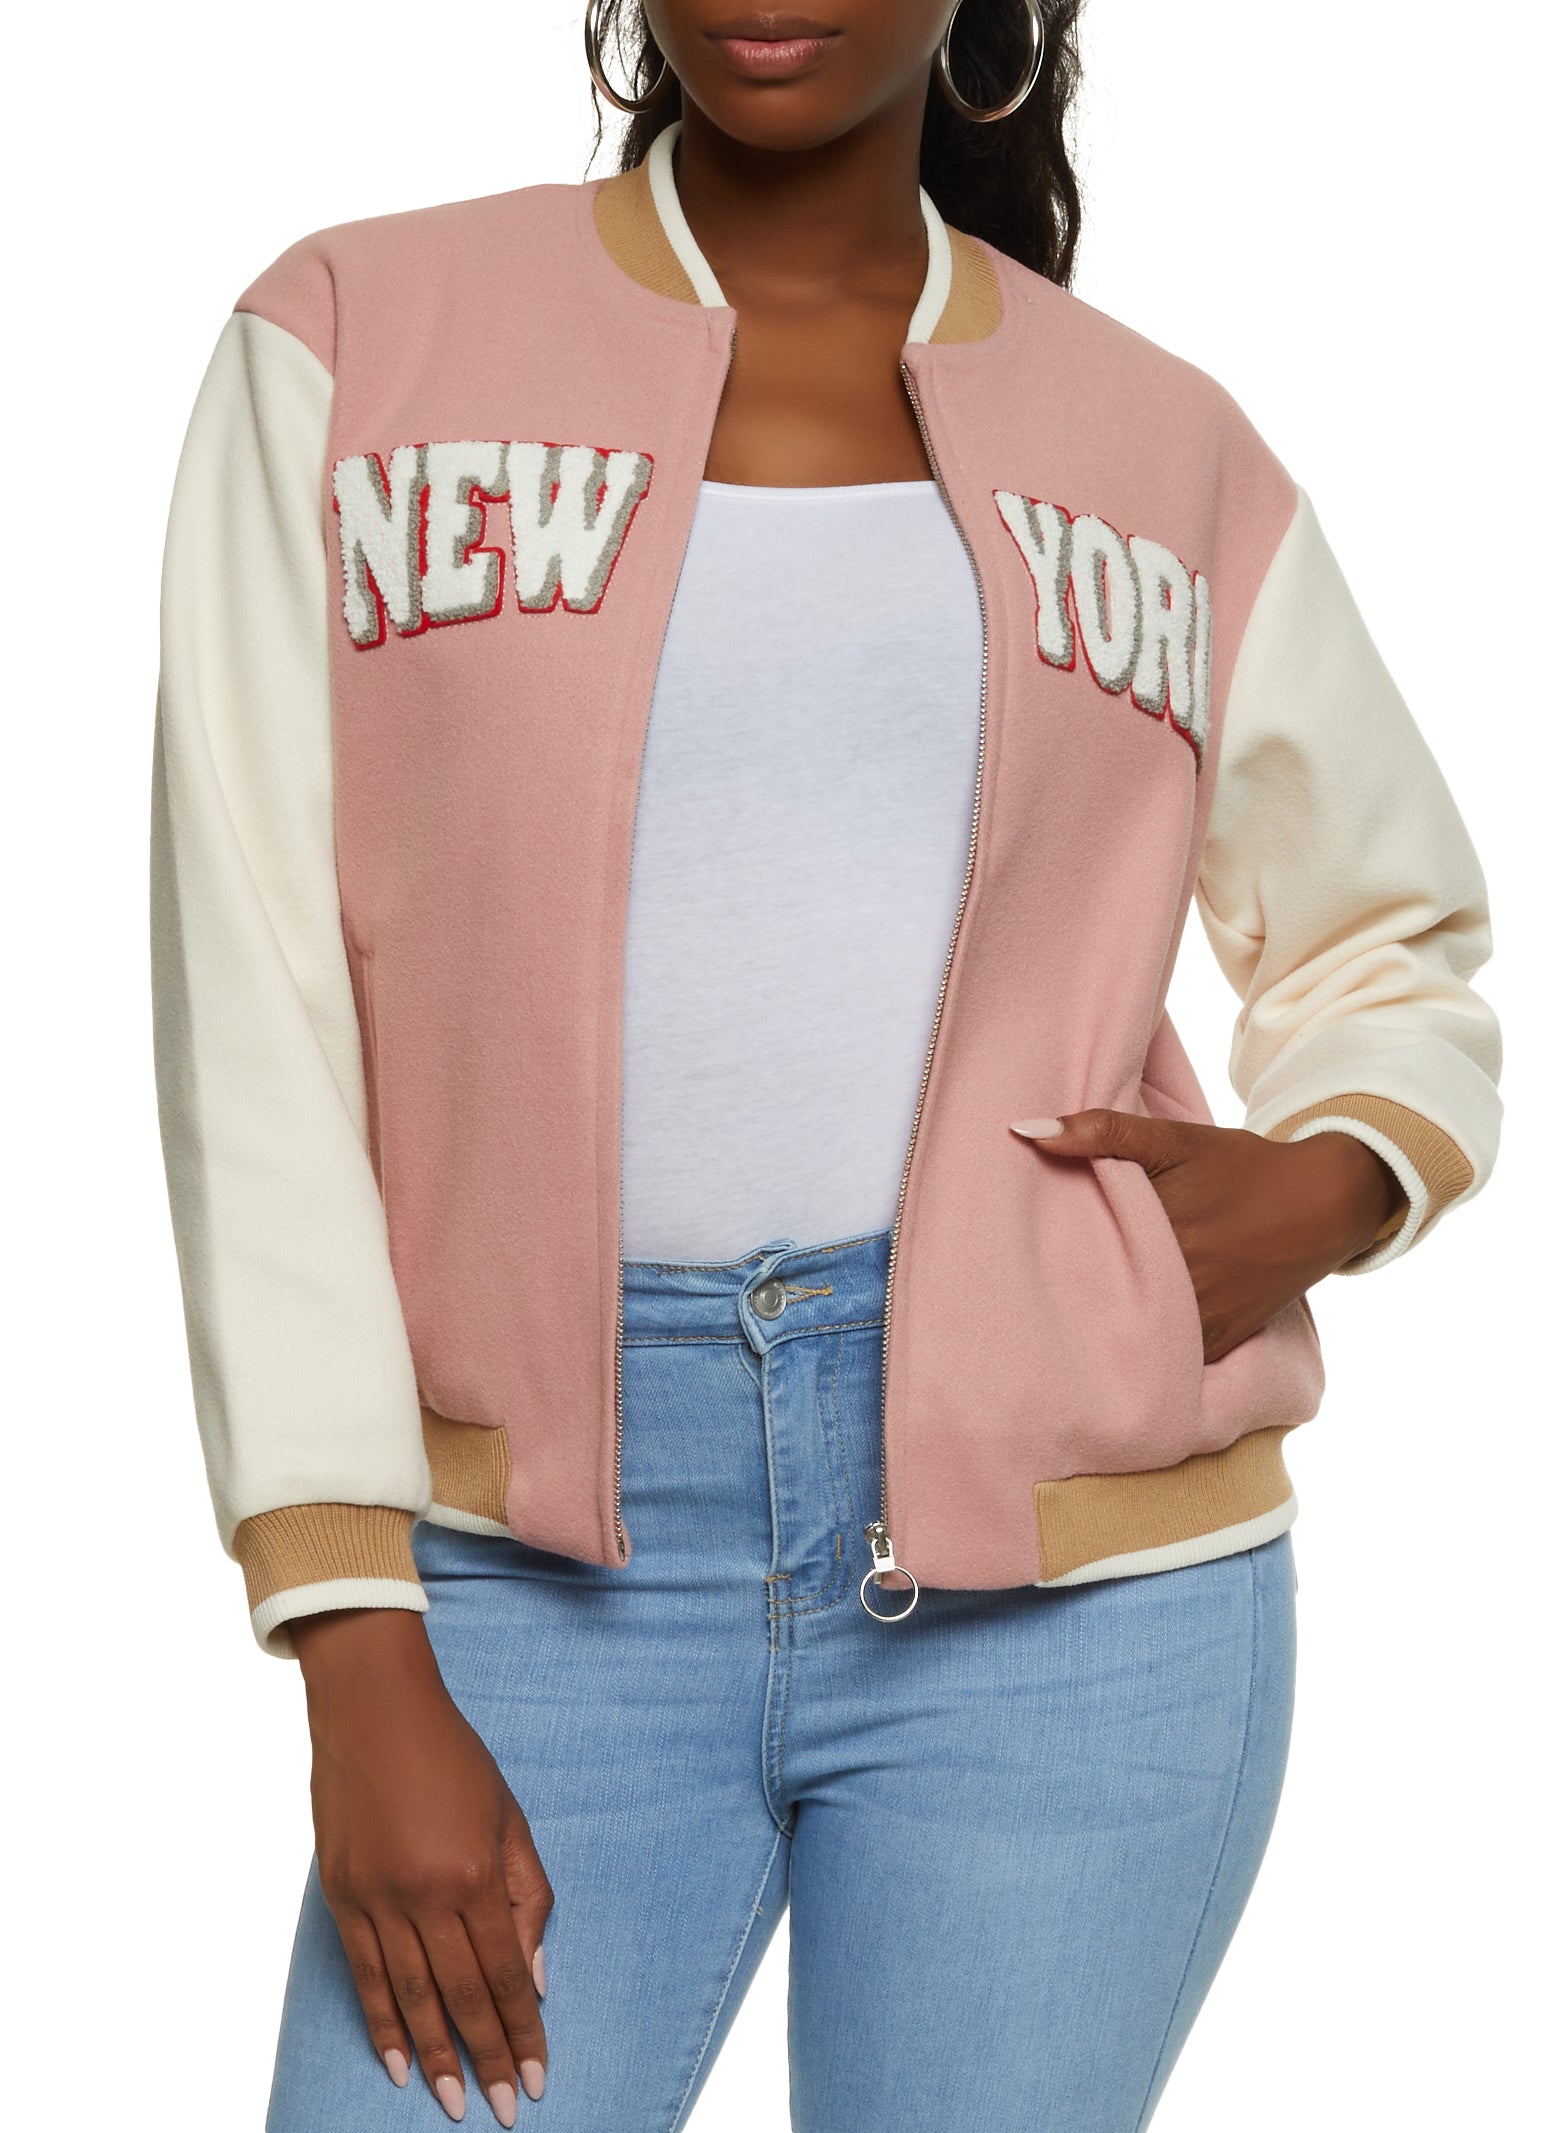 Denim Jacket with Chenille Patch